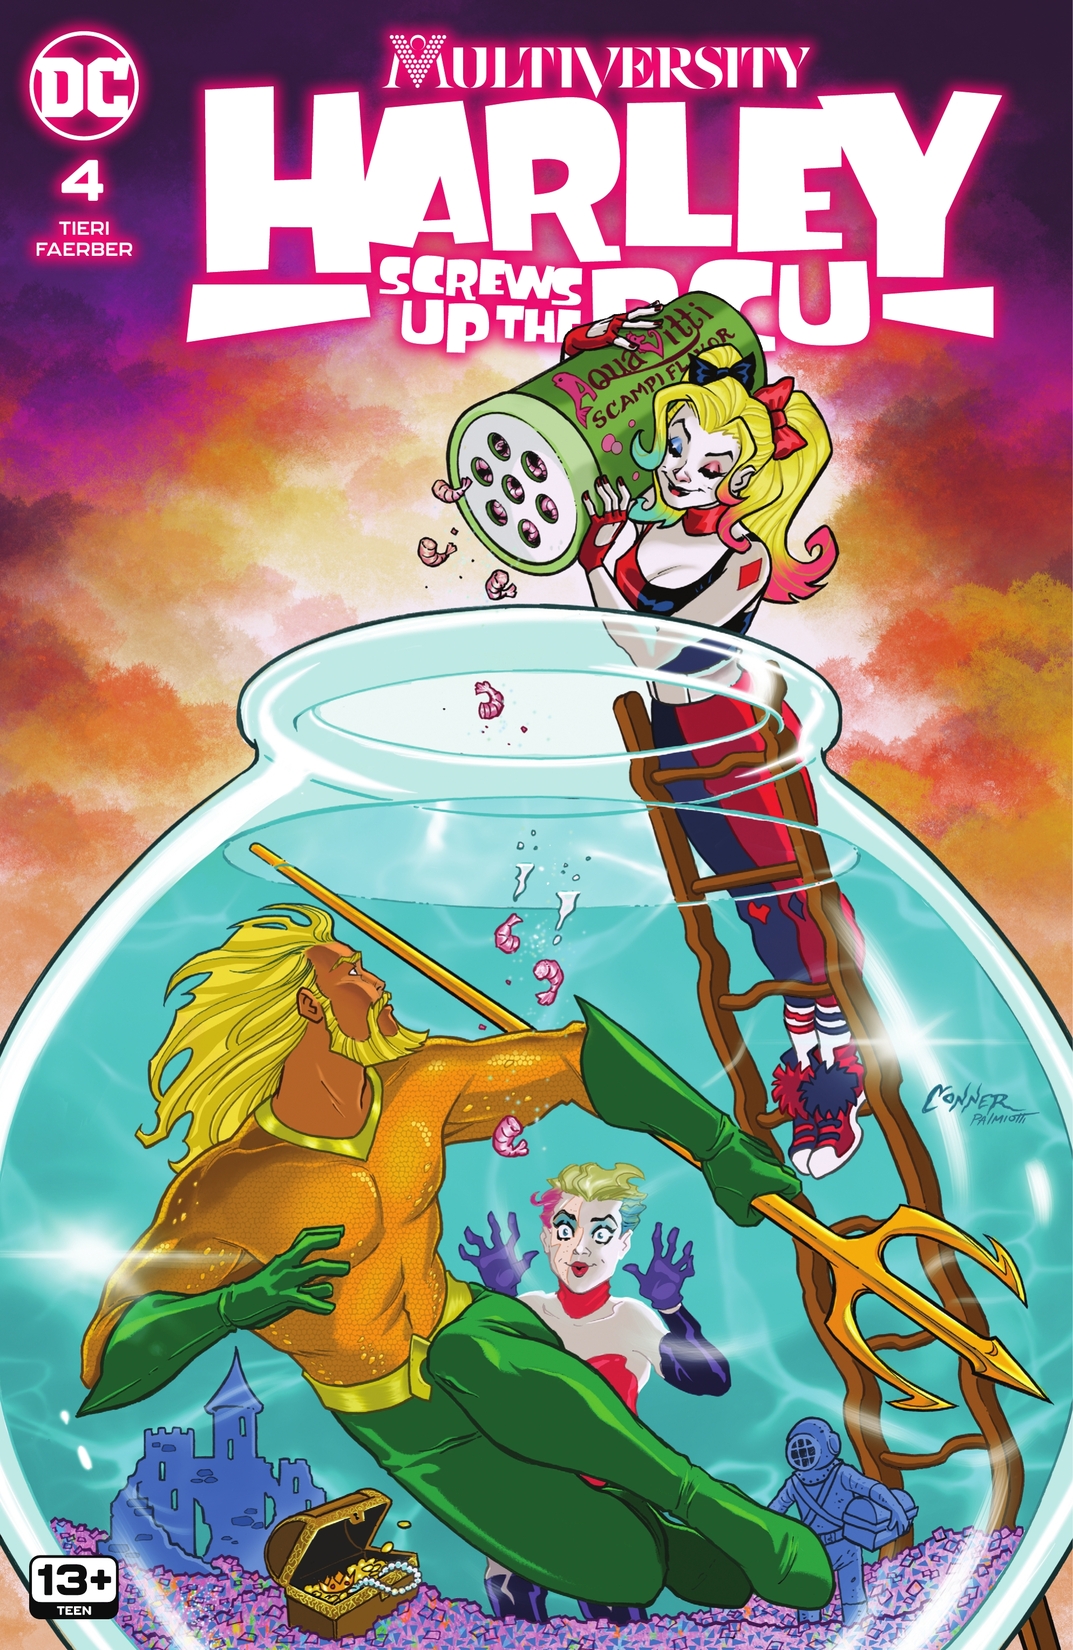 Multiversity: Harley Screws Up The DCU #4 preview images